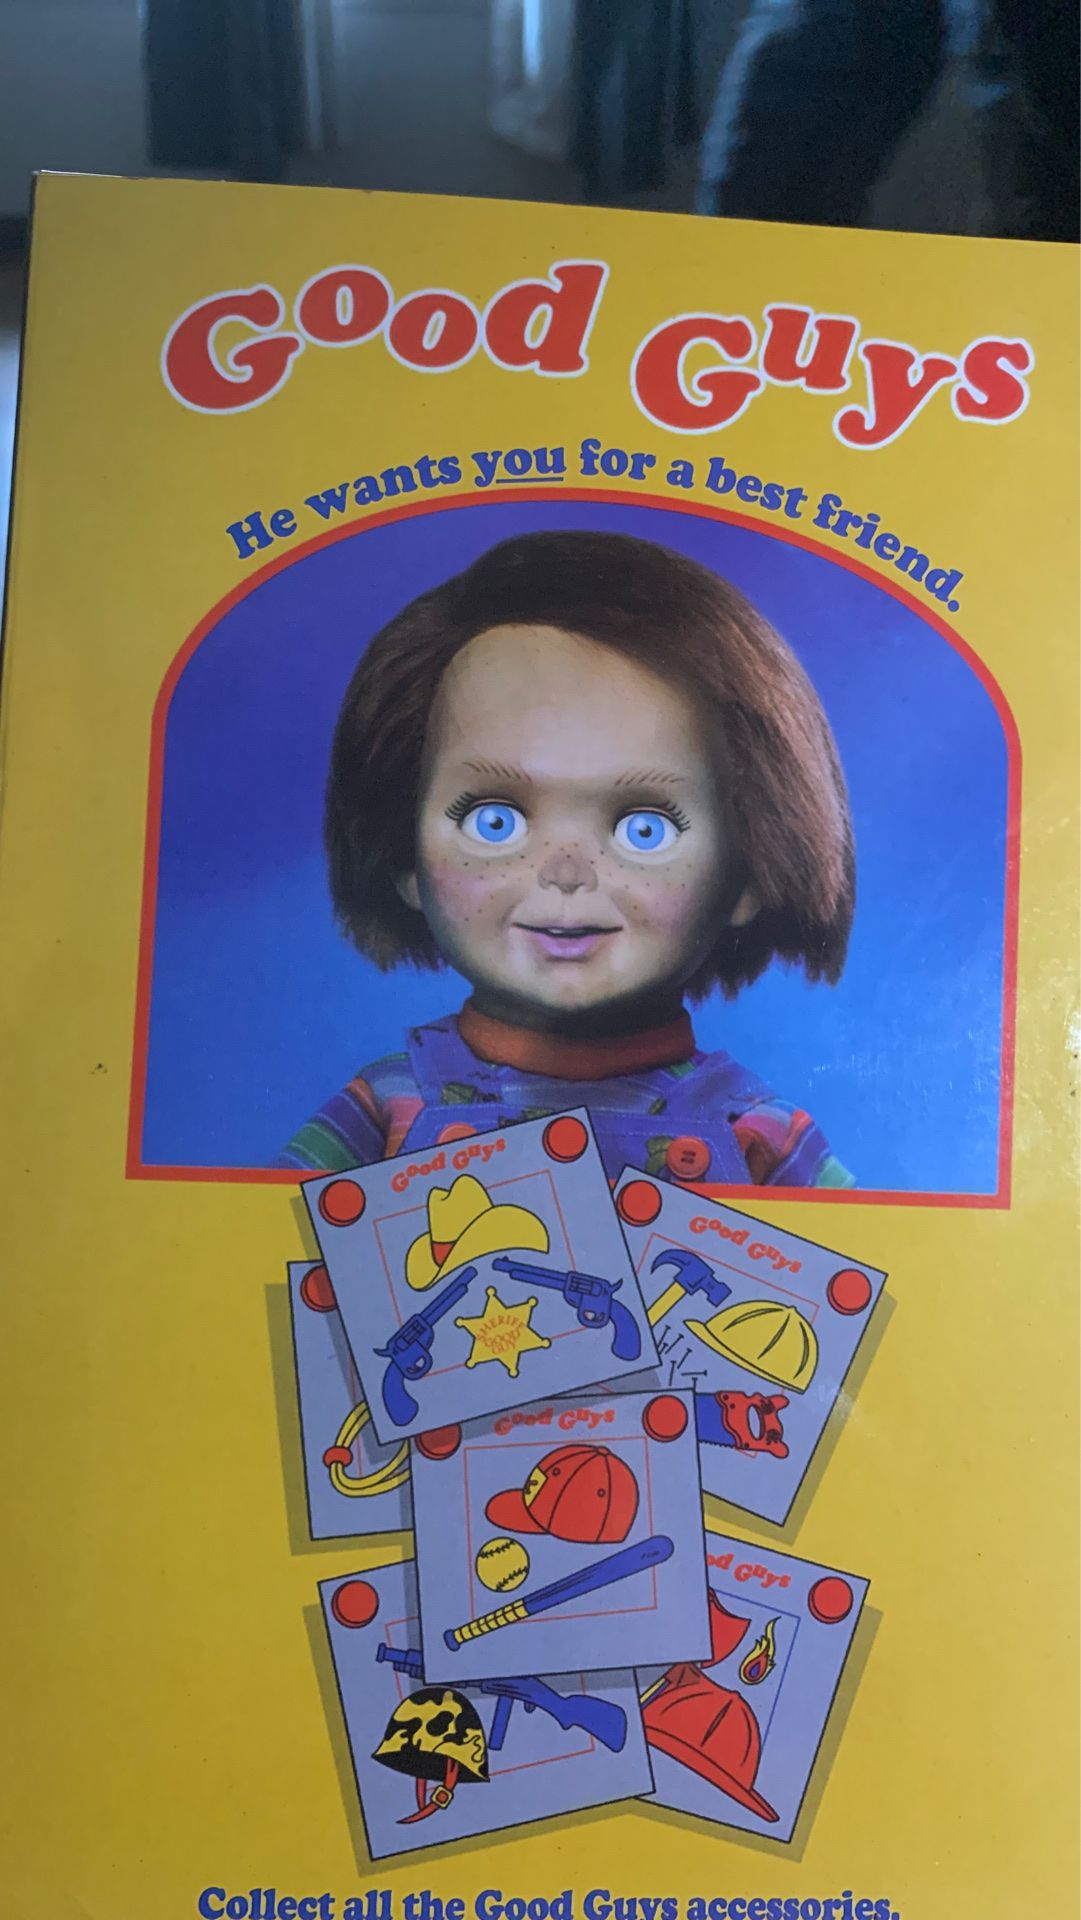 Good guys chucky doll action figure with changeable heads collectors item